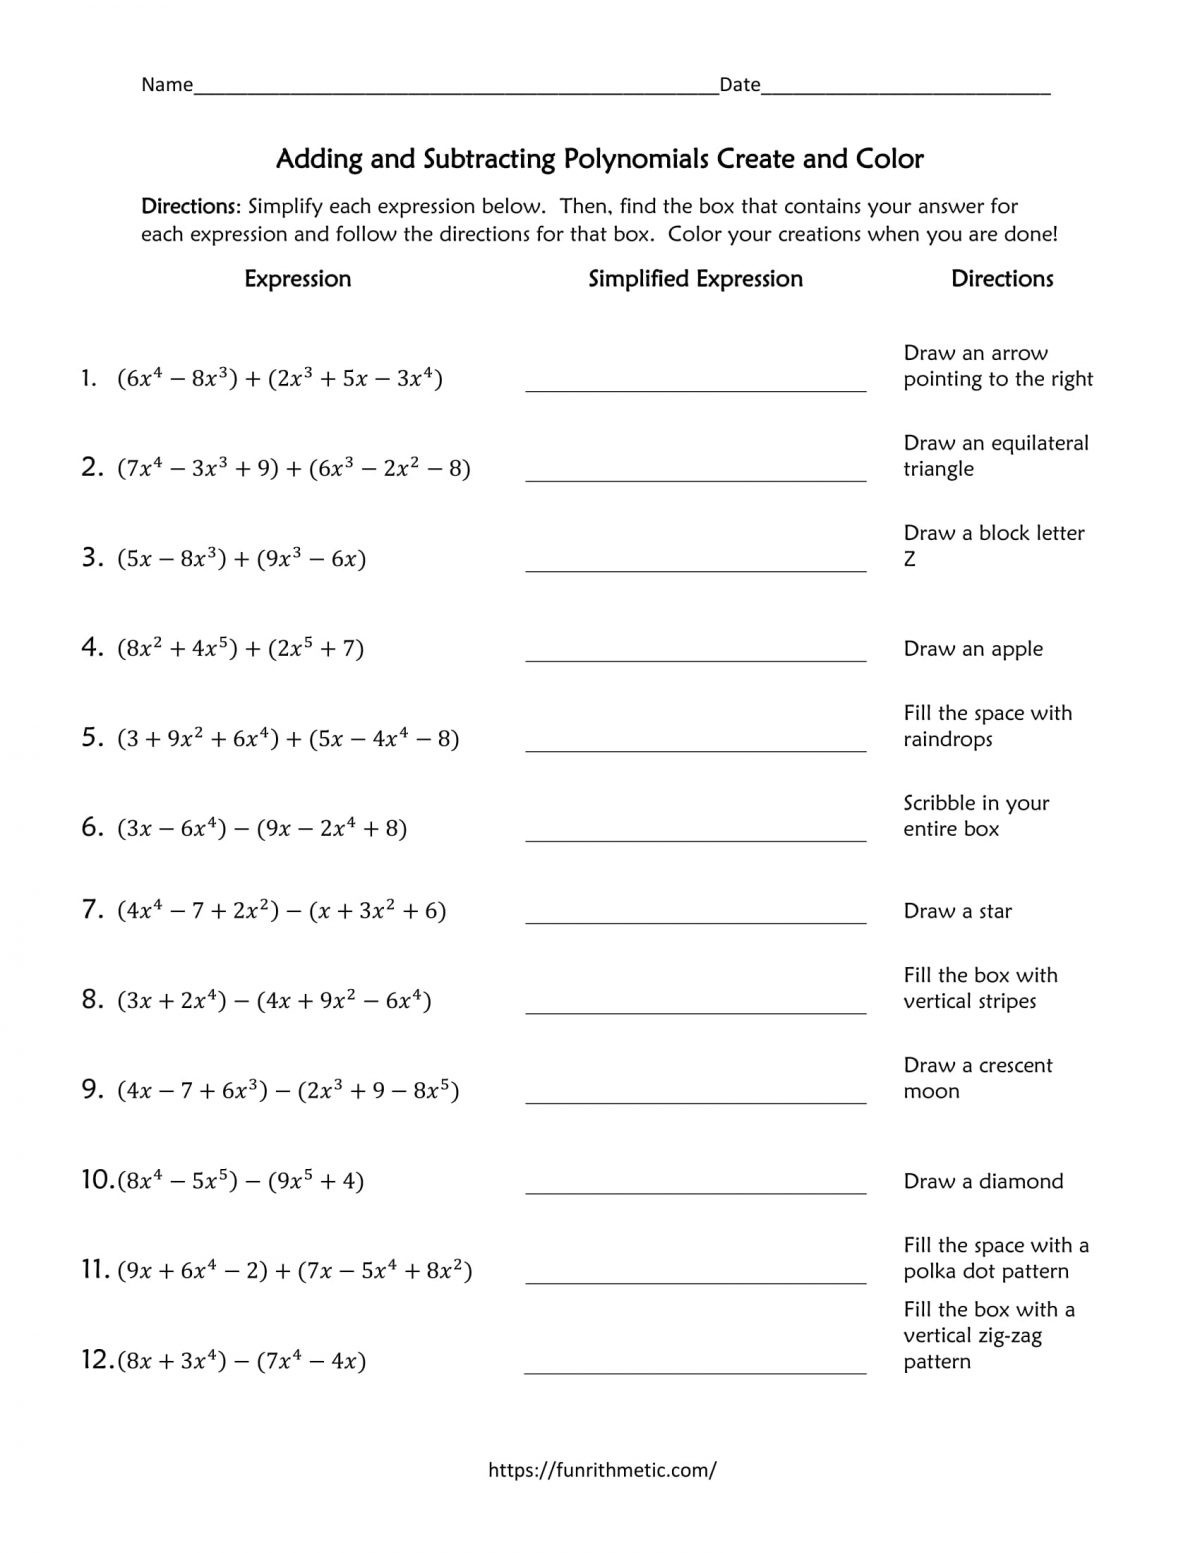 adding and subtracting polynomials